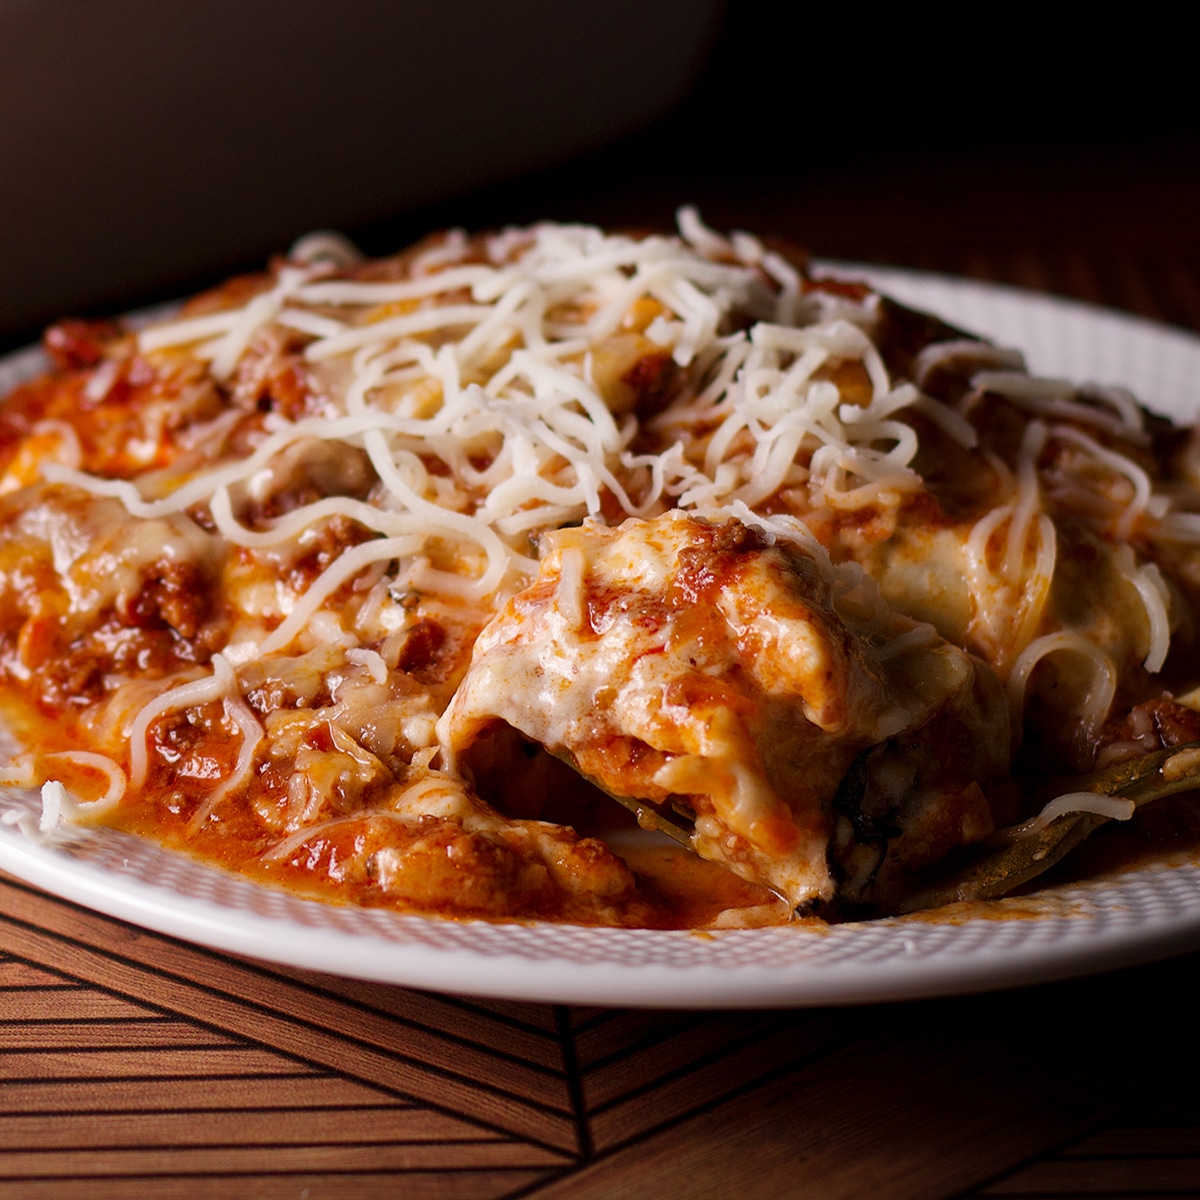 A serving of lasagna bolognese made with parmesan béchamel sauce on a white plate.